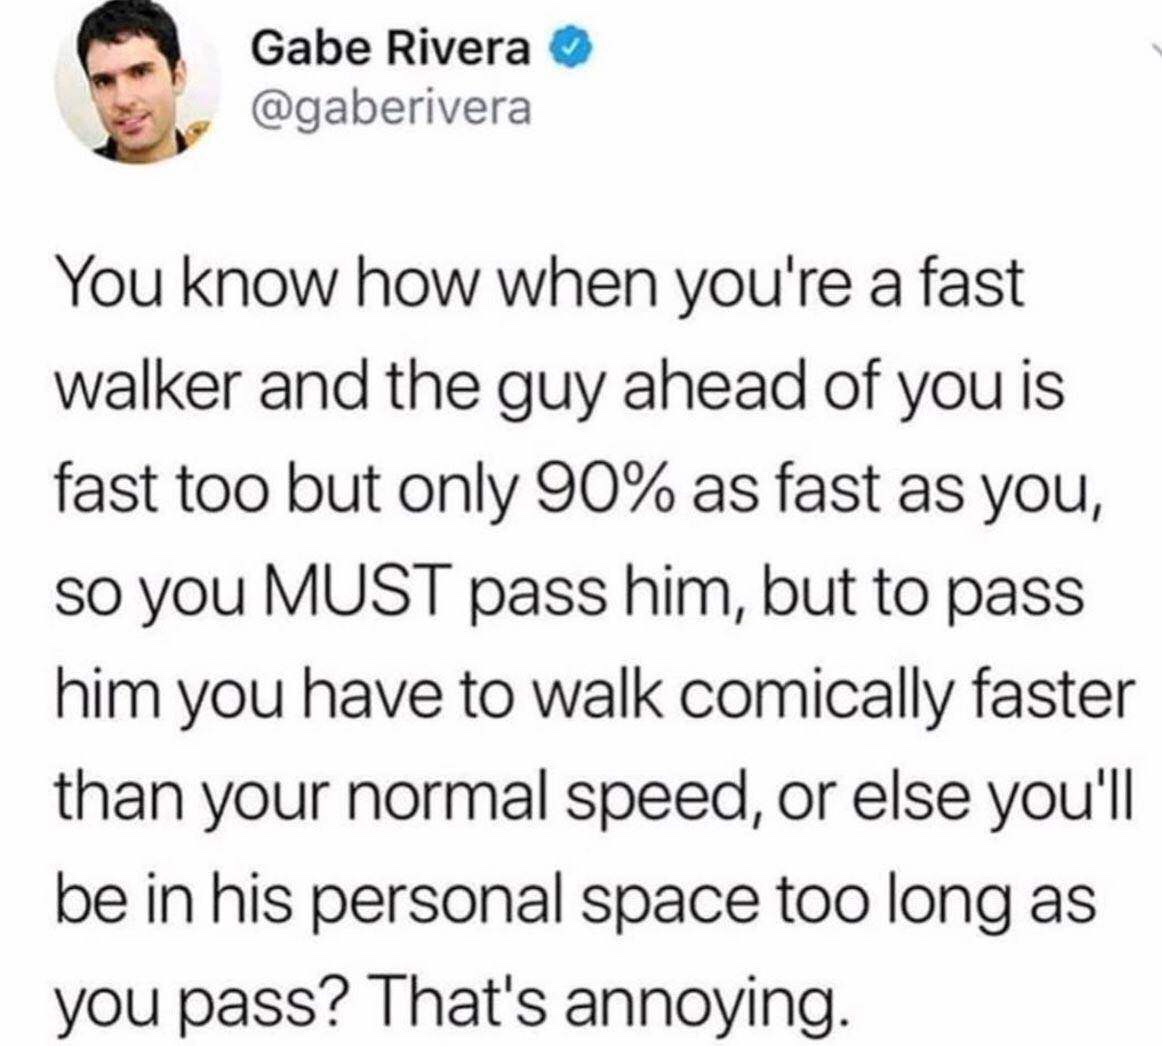 random pics - Gabe Rivera You know how when you're a fast walker and the guy ahead of you is fast too but only 90% as fast as you, so you Must pass him, but to pass him you have to walk comically faster than your normal speed, or else you'll be in his per